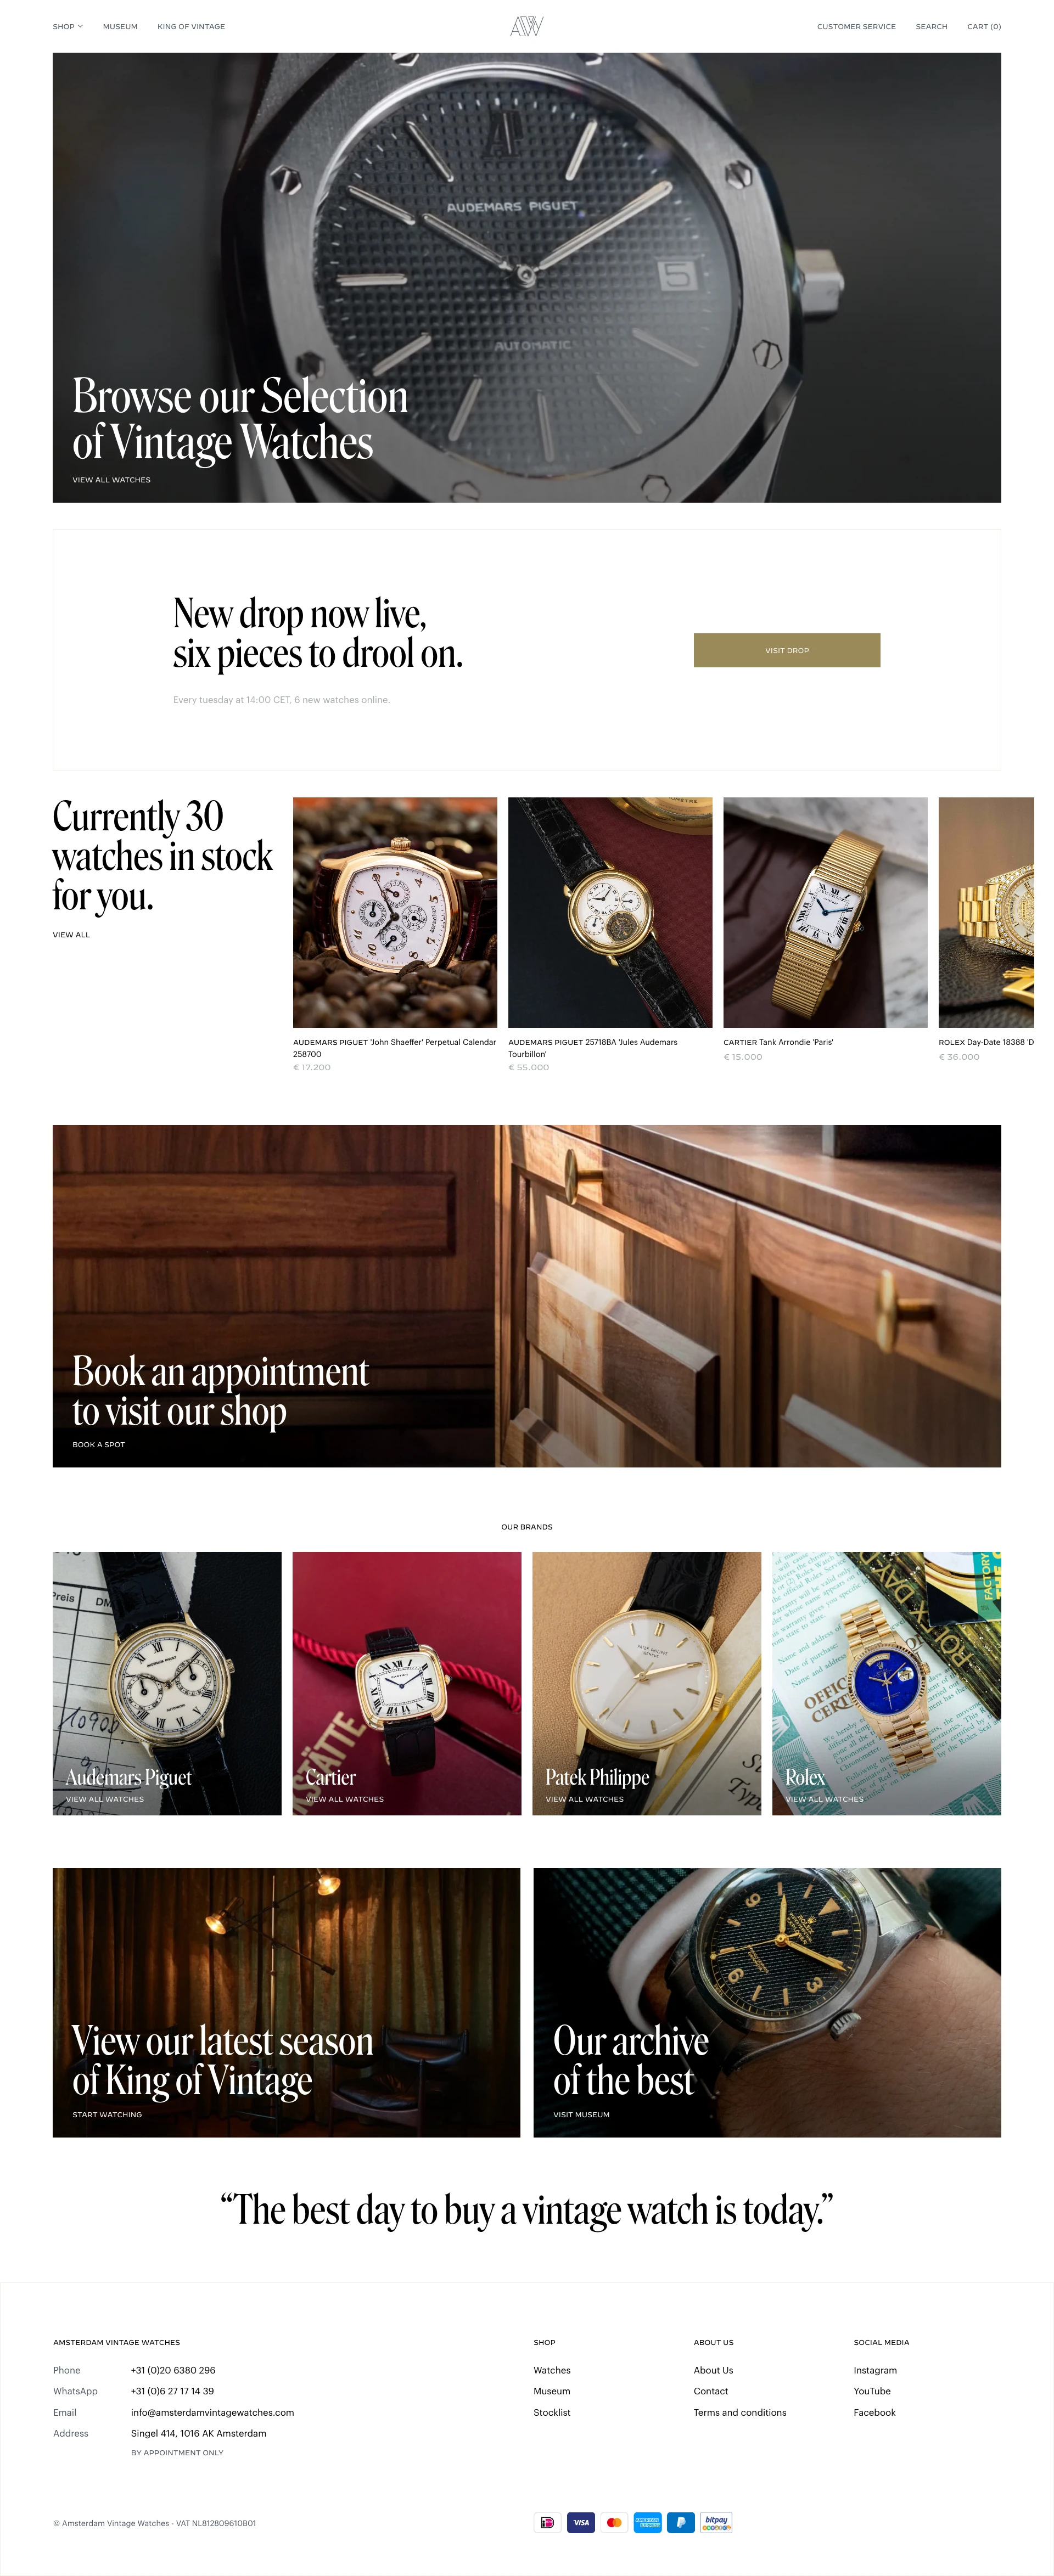 Amsterdam Vintage Watches Landing Page Example: We specialise in the trade of the worlds finest watches from Rolex, Patek Philippe, Audemars Piguet & Cartier.